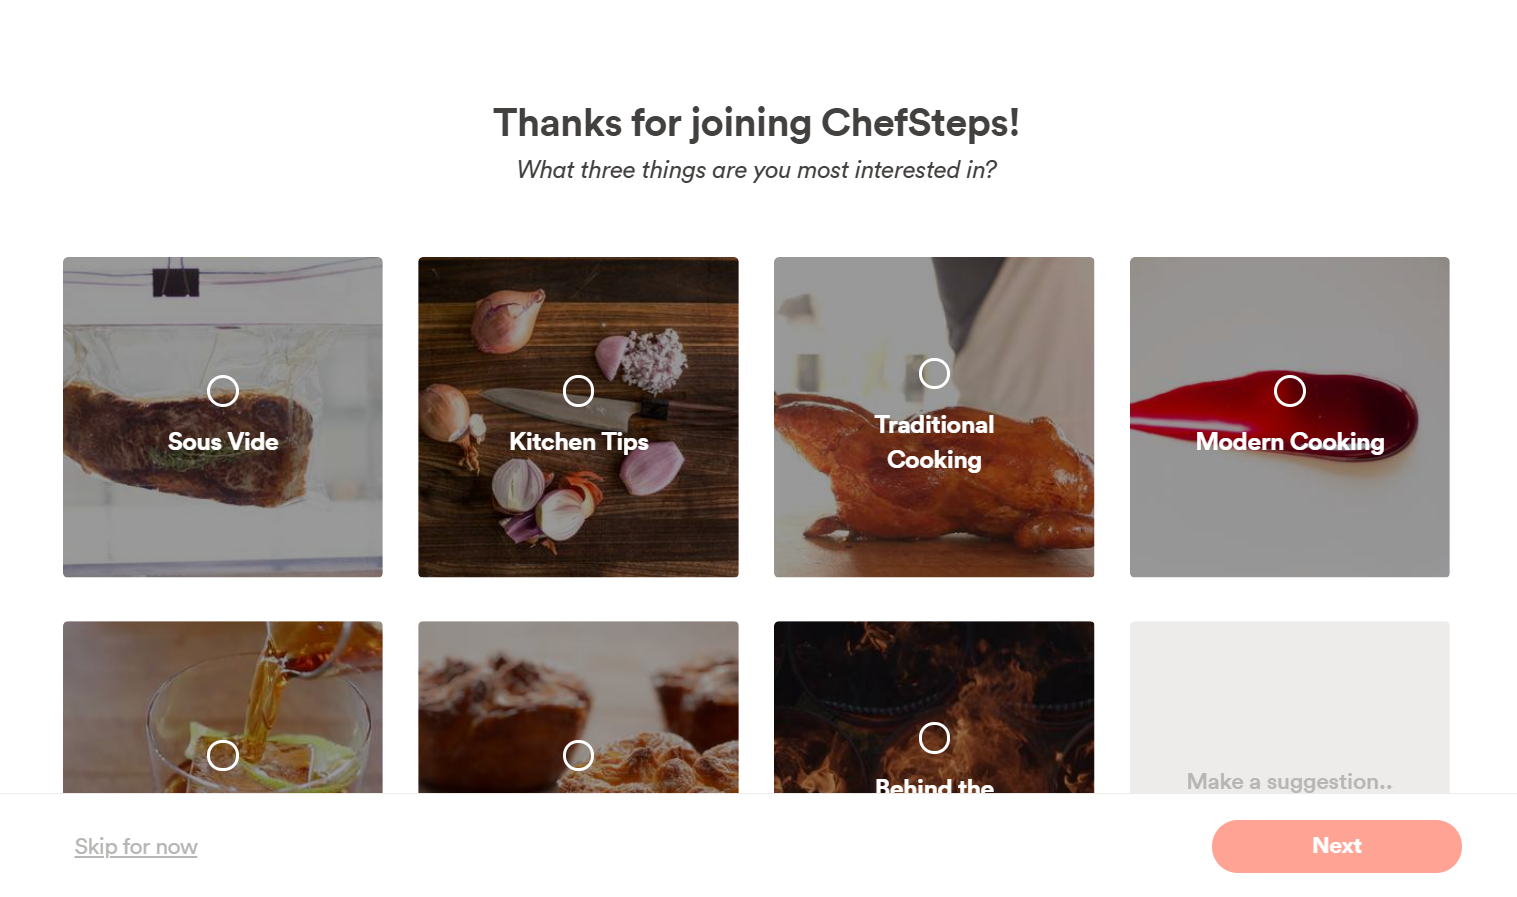 chefsteps thank you